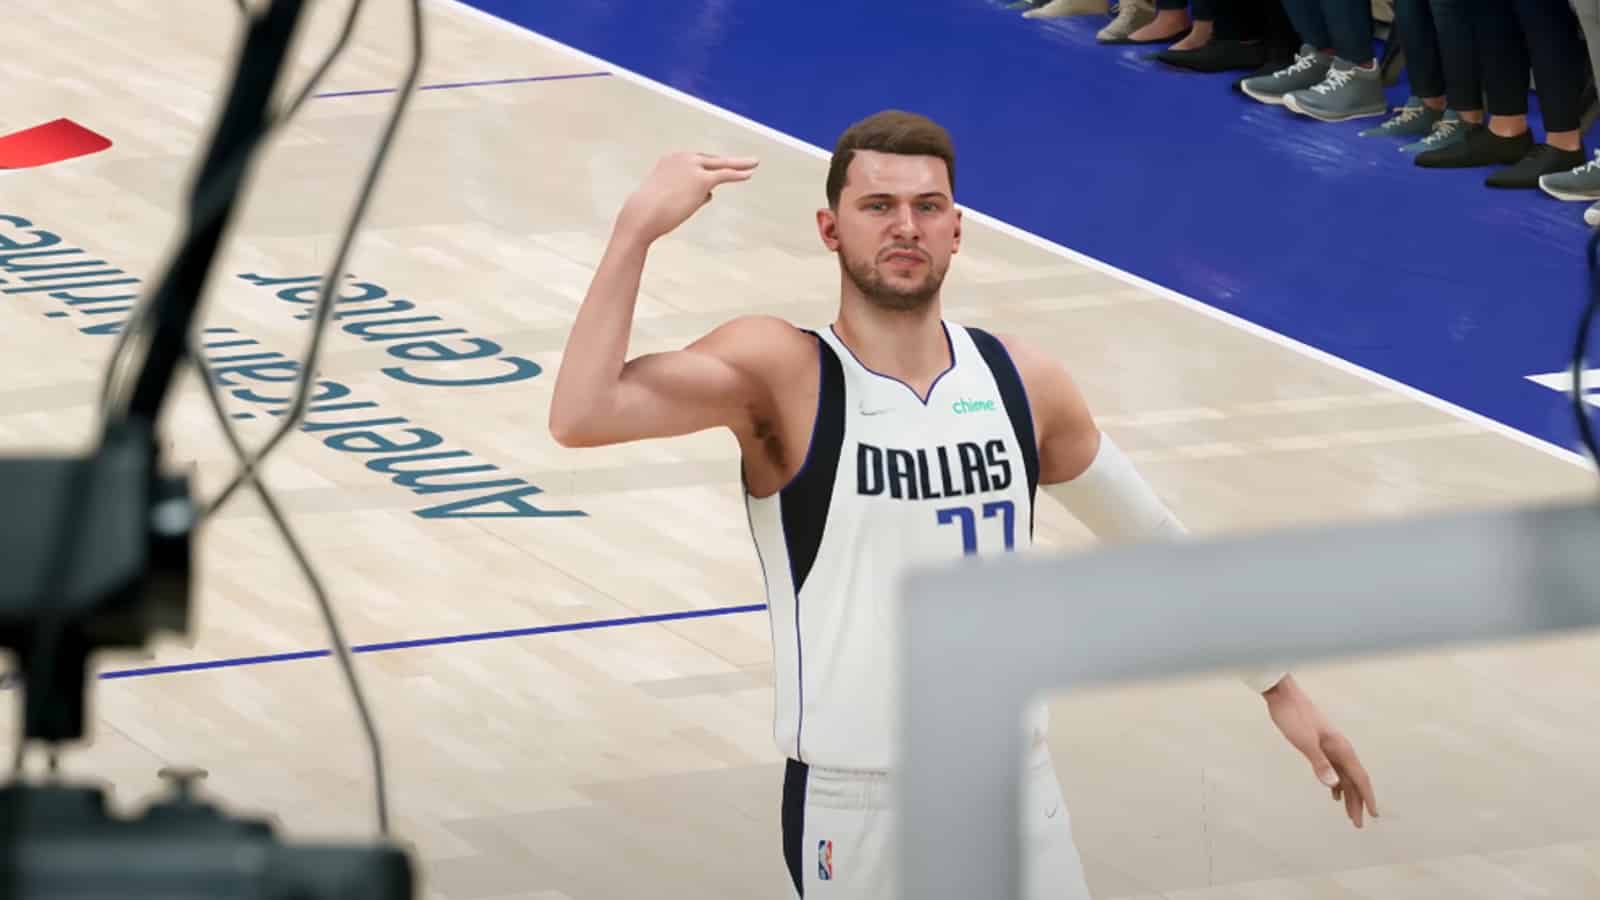 NBA 2K23 UPDATED PLAYER RATINGS FOR 2022-2023 Season March 9th New